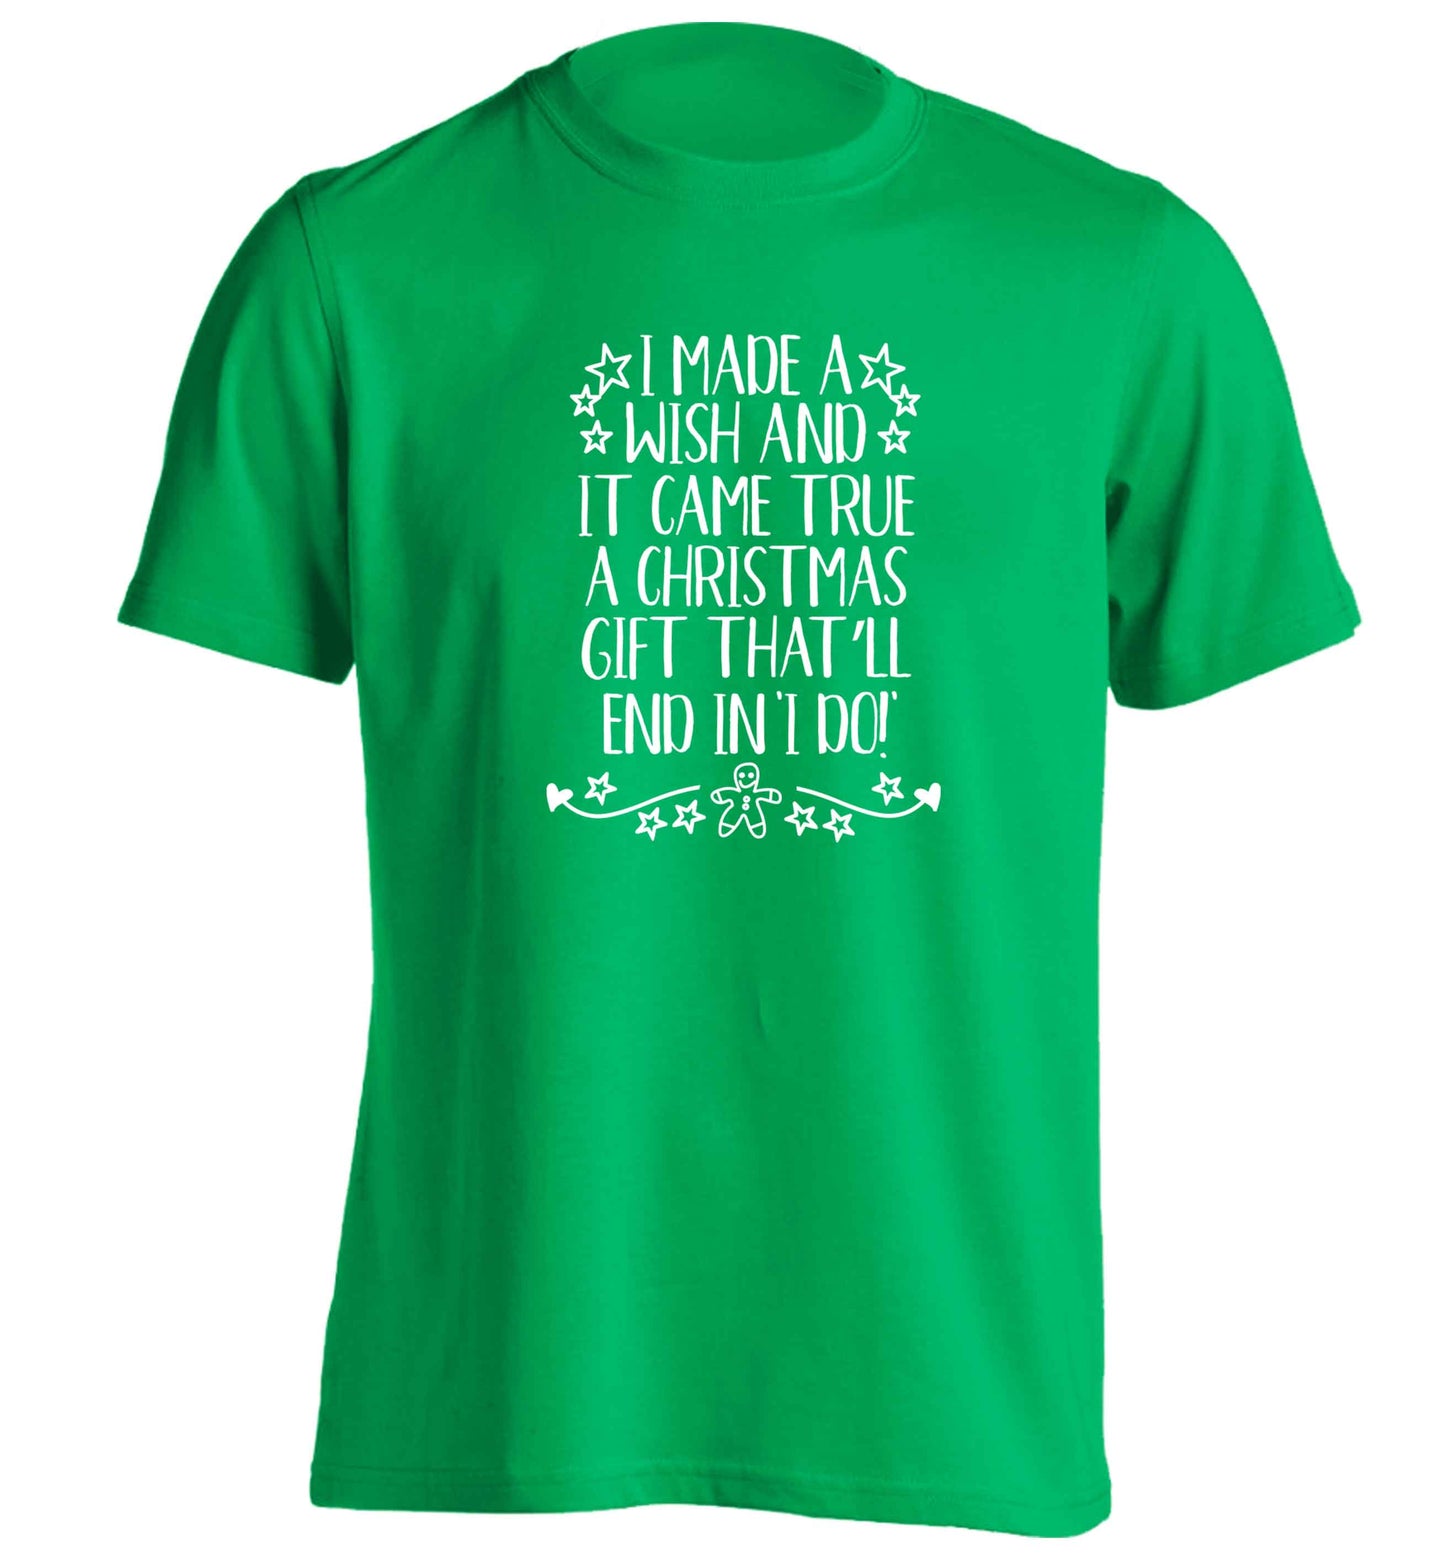 I made a wish and it came true a Christmas gift that'll end in 'I do' adults unisex green Tshirt 2XL